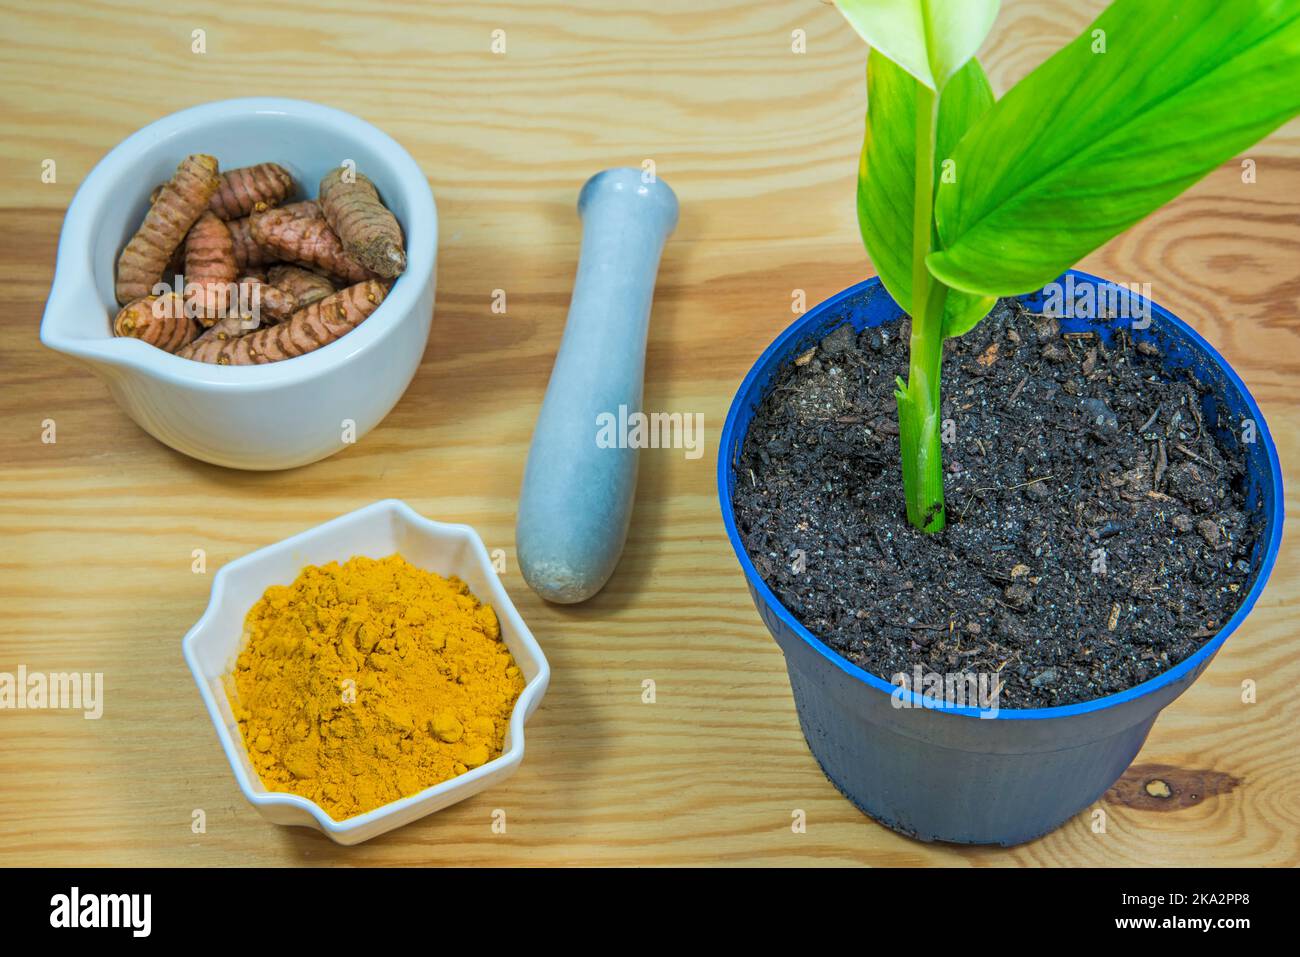 turmeric, plant, roots and powder Stock Photo